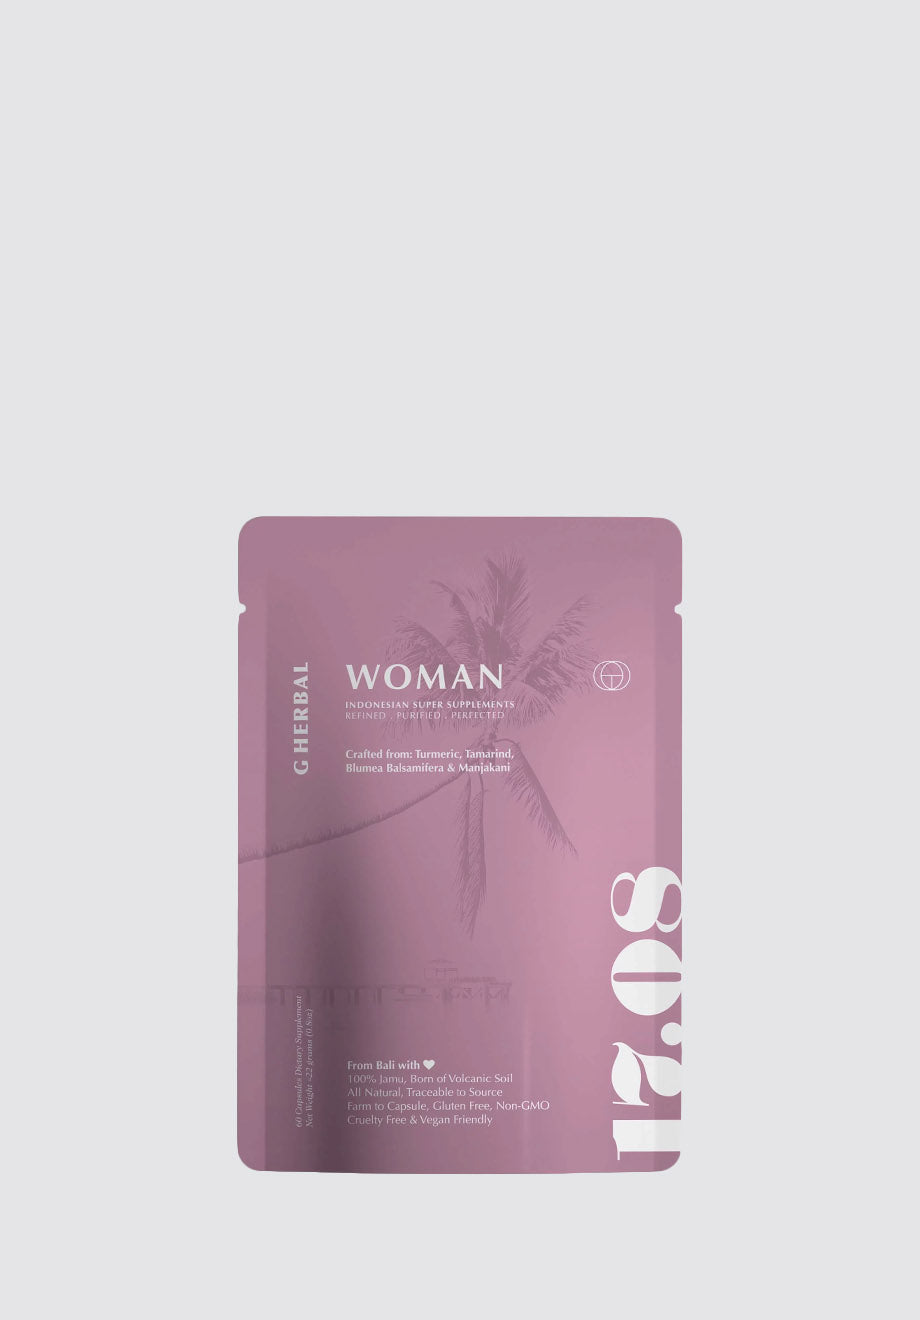 WOMAN by G Herbal